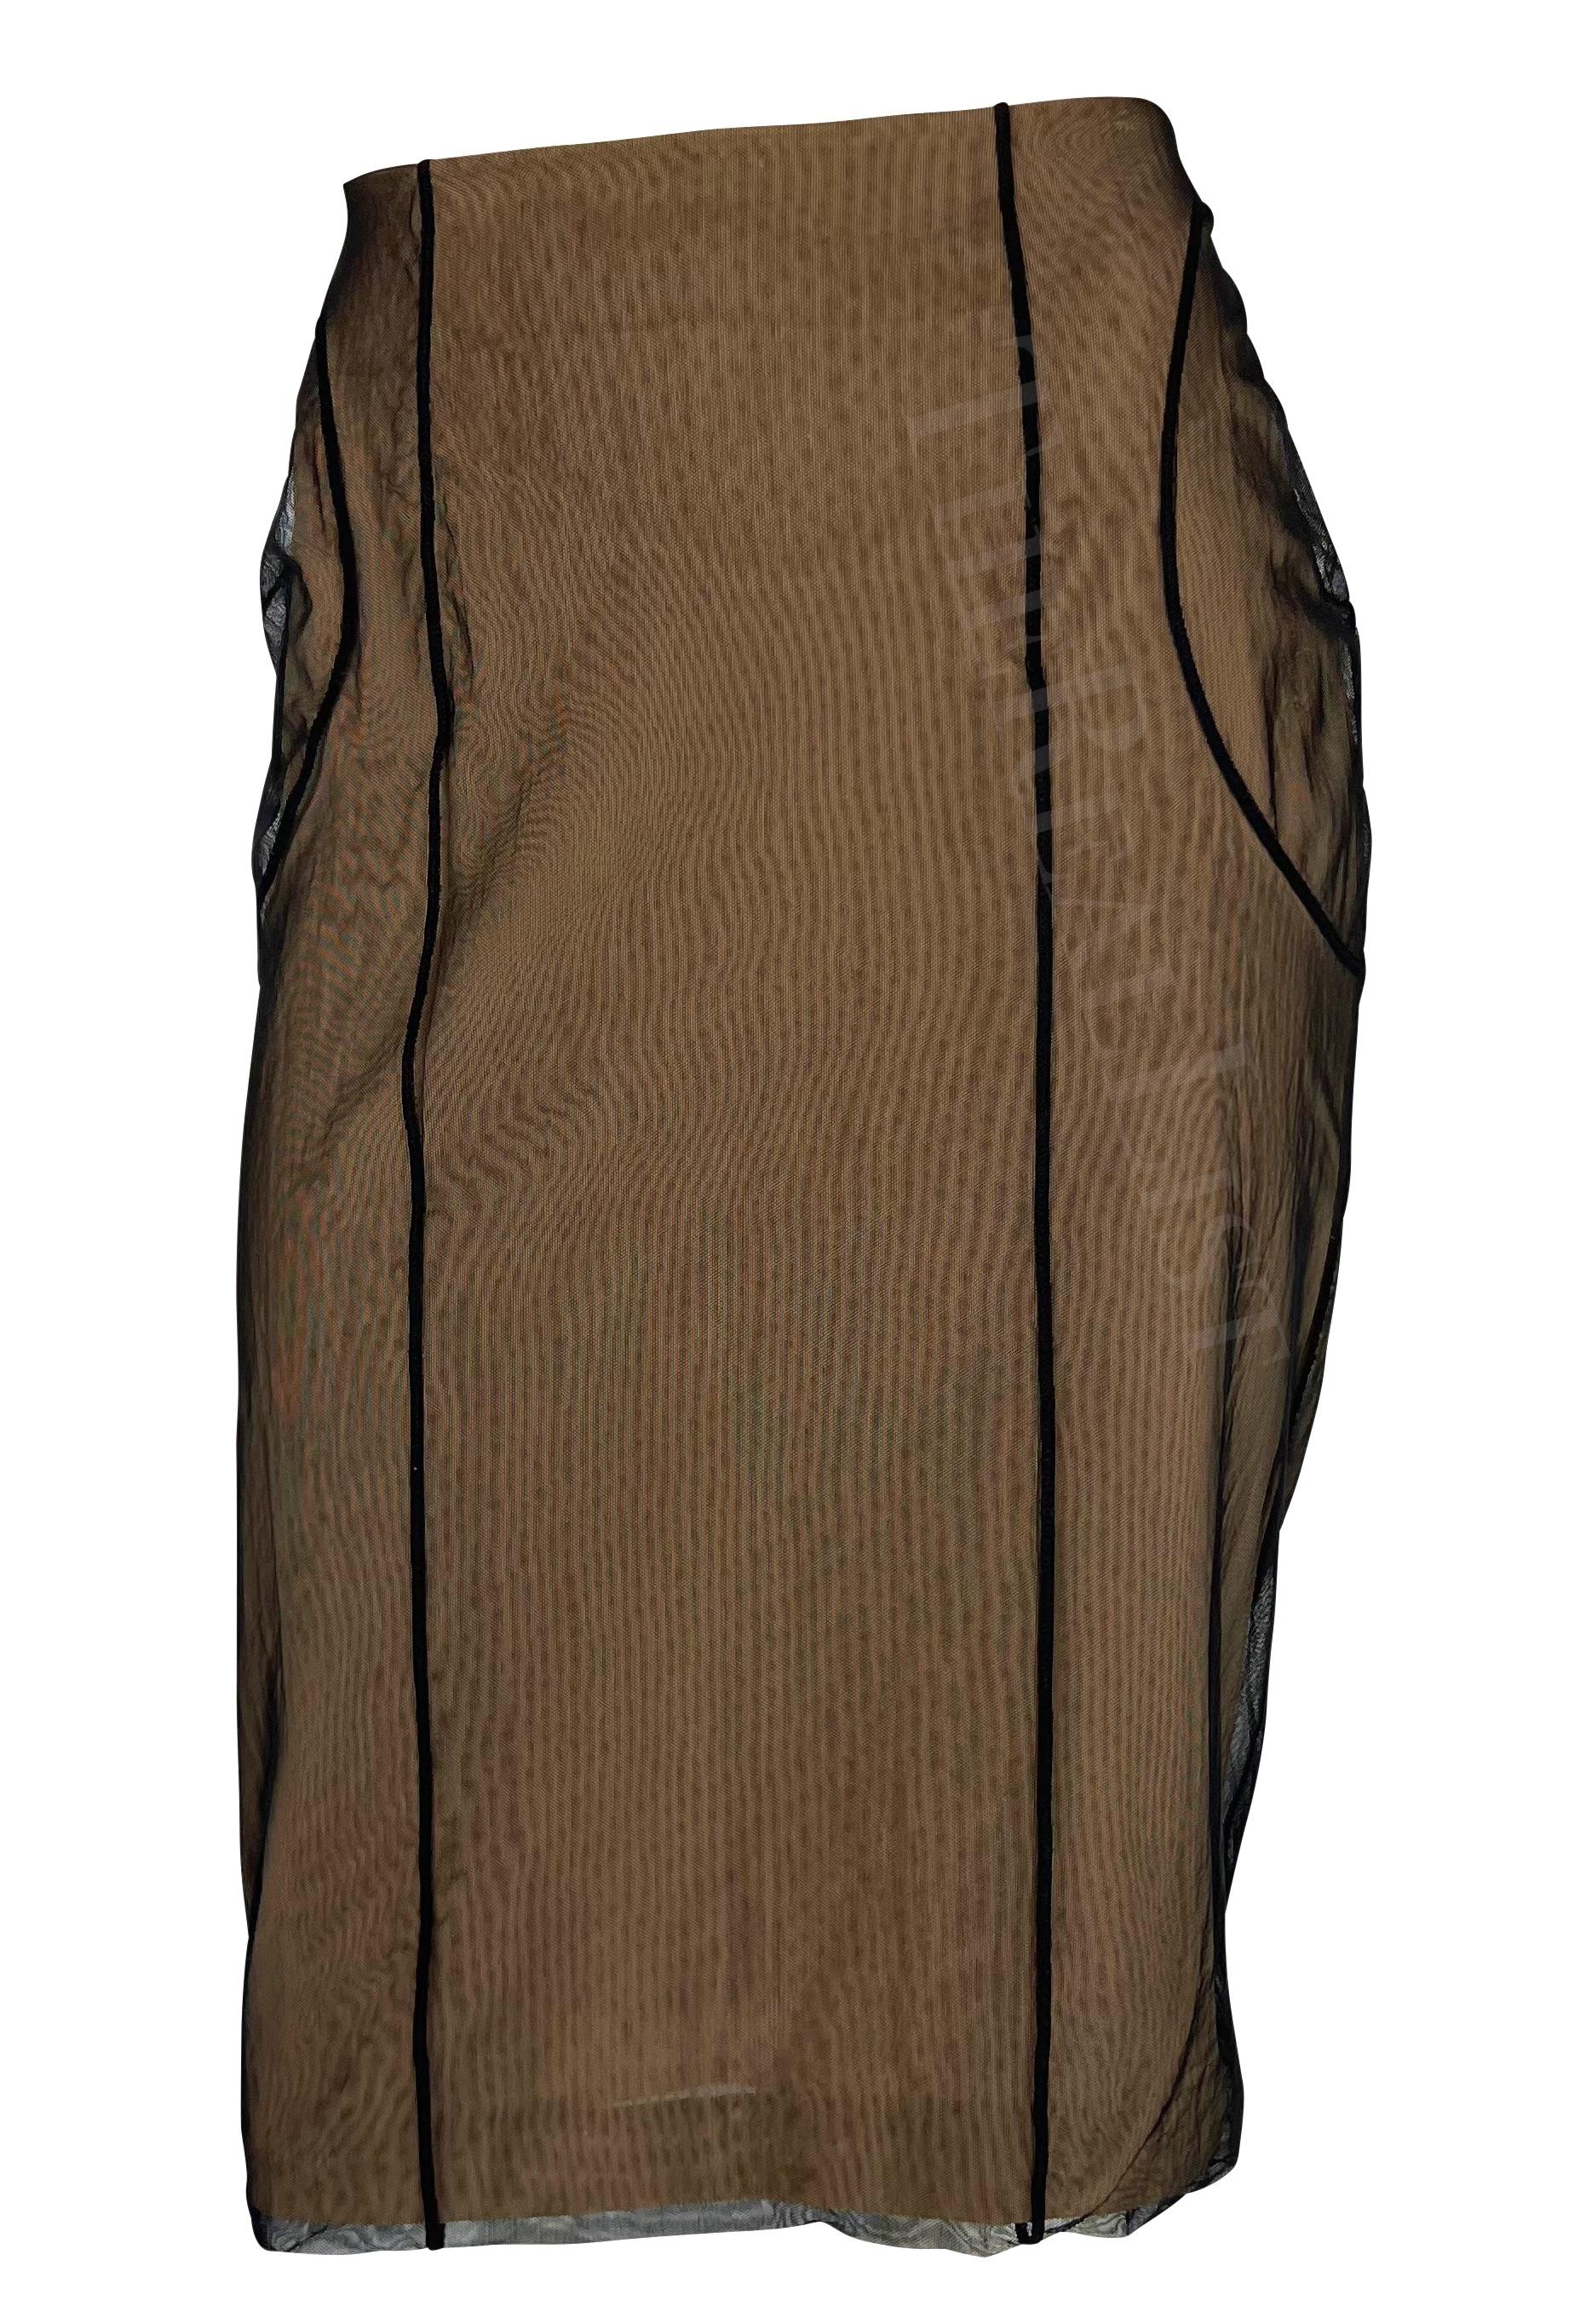 Presenting a fabulous beige and black tulle Gucci skirt, designed by Tom Ford. From the Spring/Summer 2001 collection, this beige skirt is made complete with a black tulle overlay with tactfully placed seams.   

Approximate measurements:
Size -